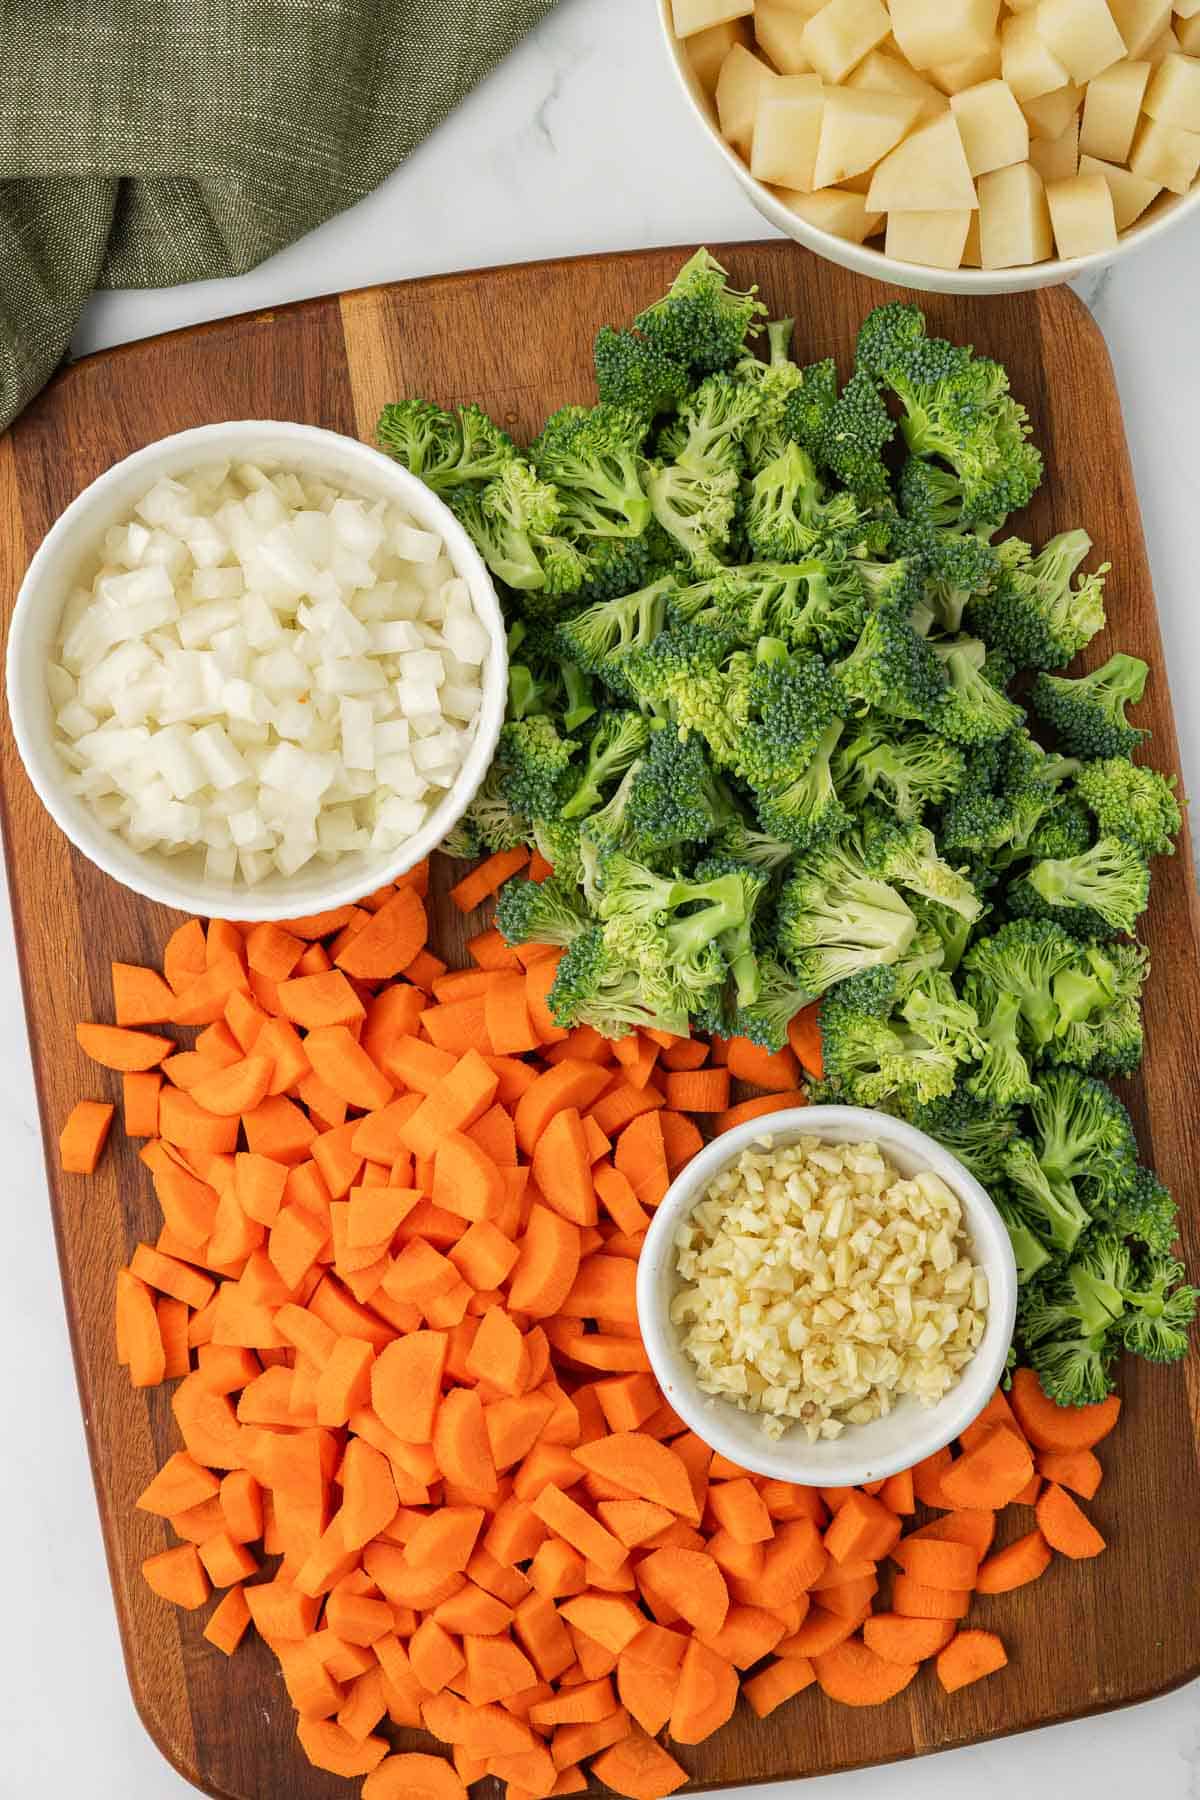 chopped up vegetables for soup on a cutting board